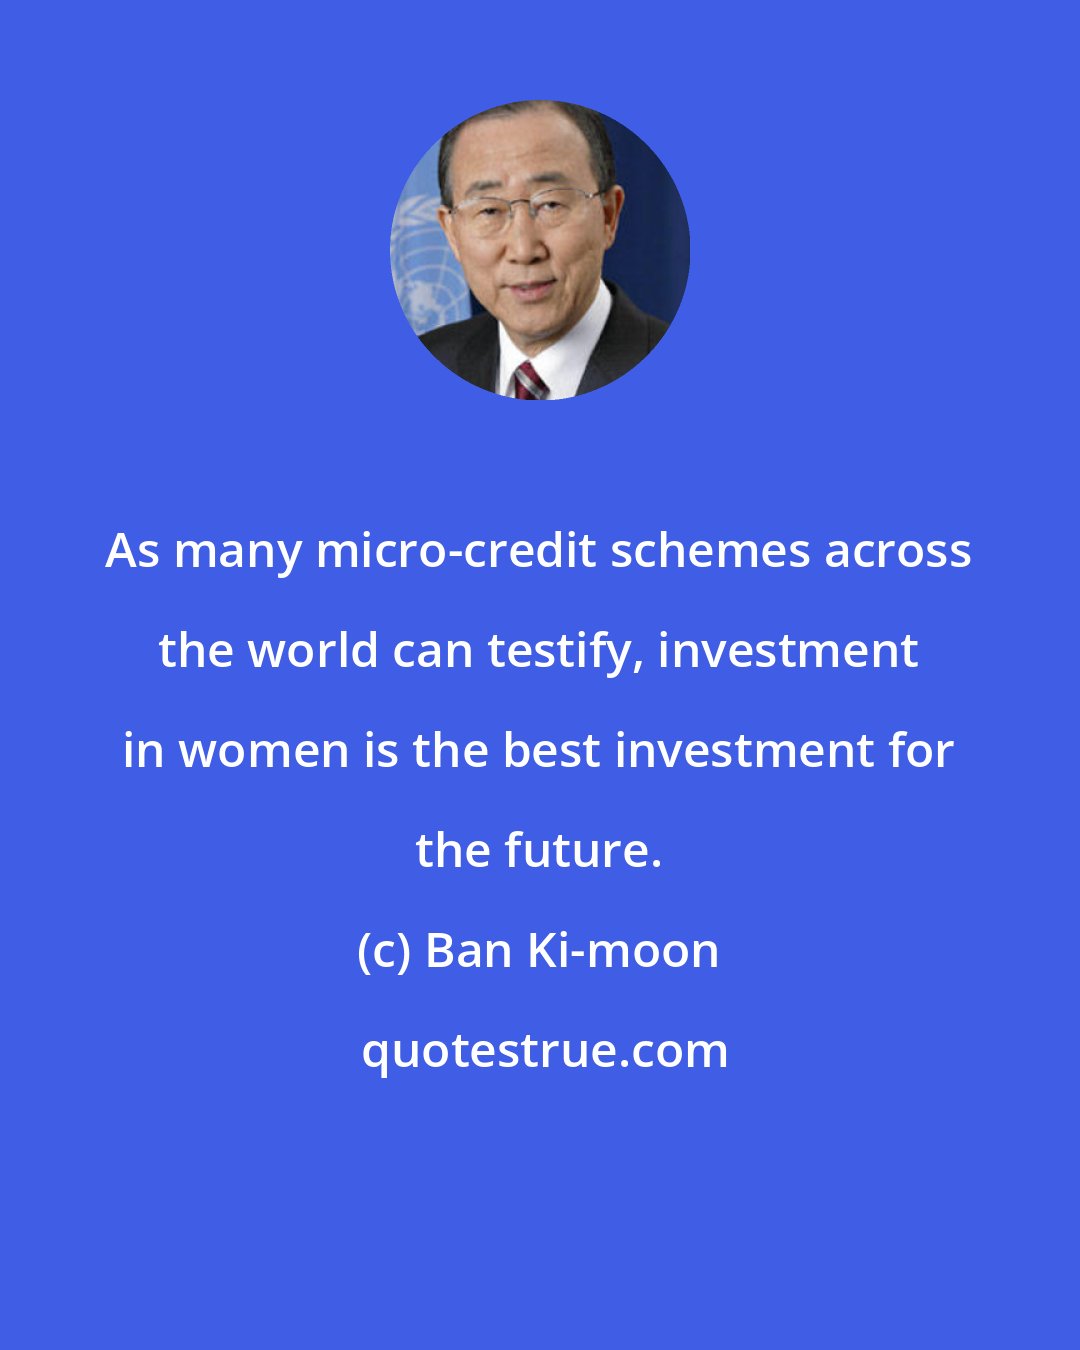 Ban Ki-moon: As many micro-credit schemes across the world can testify, investment in women is the best investment for the future.